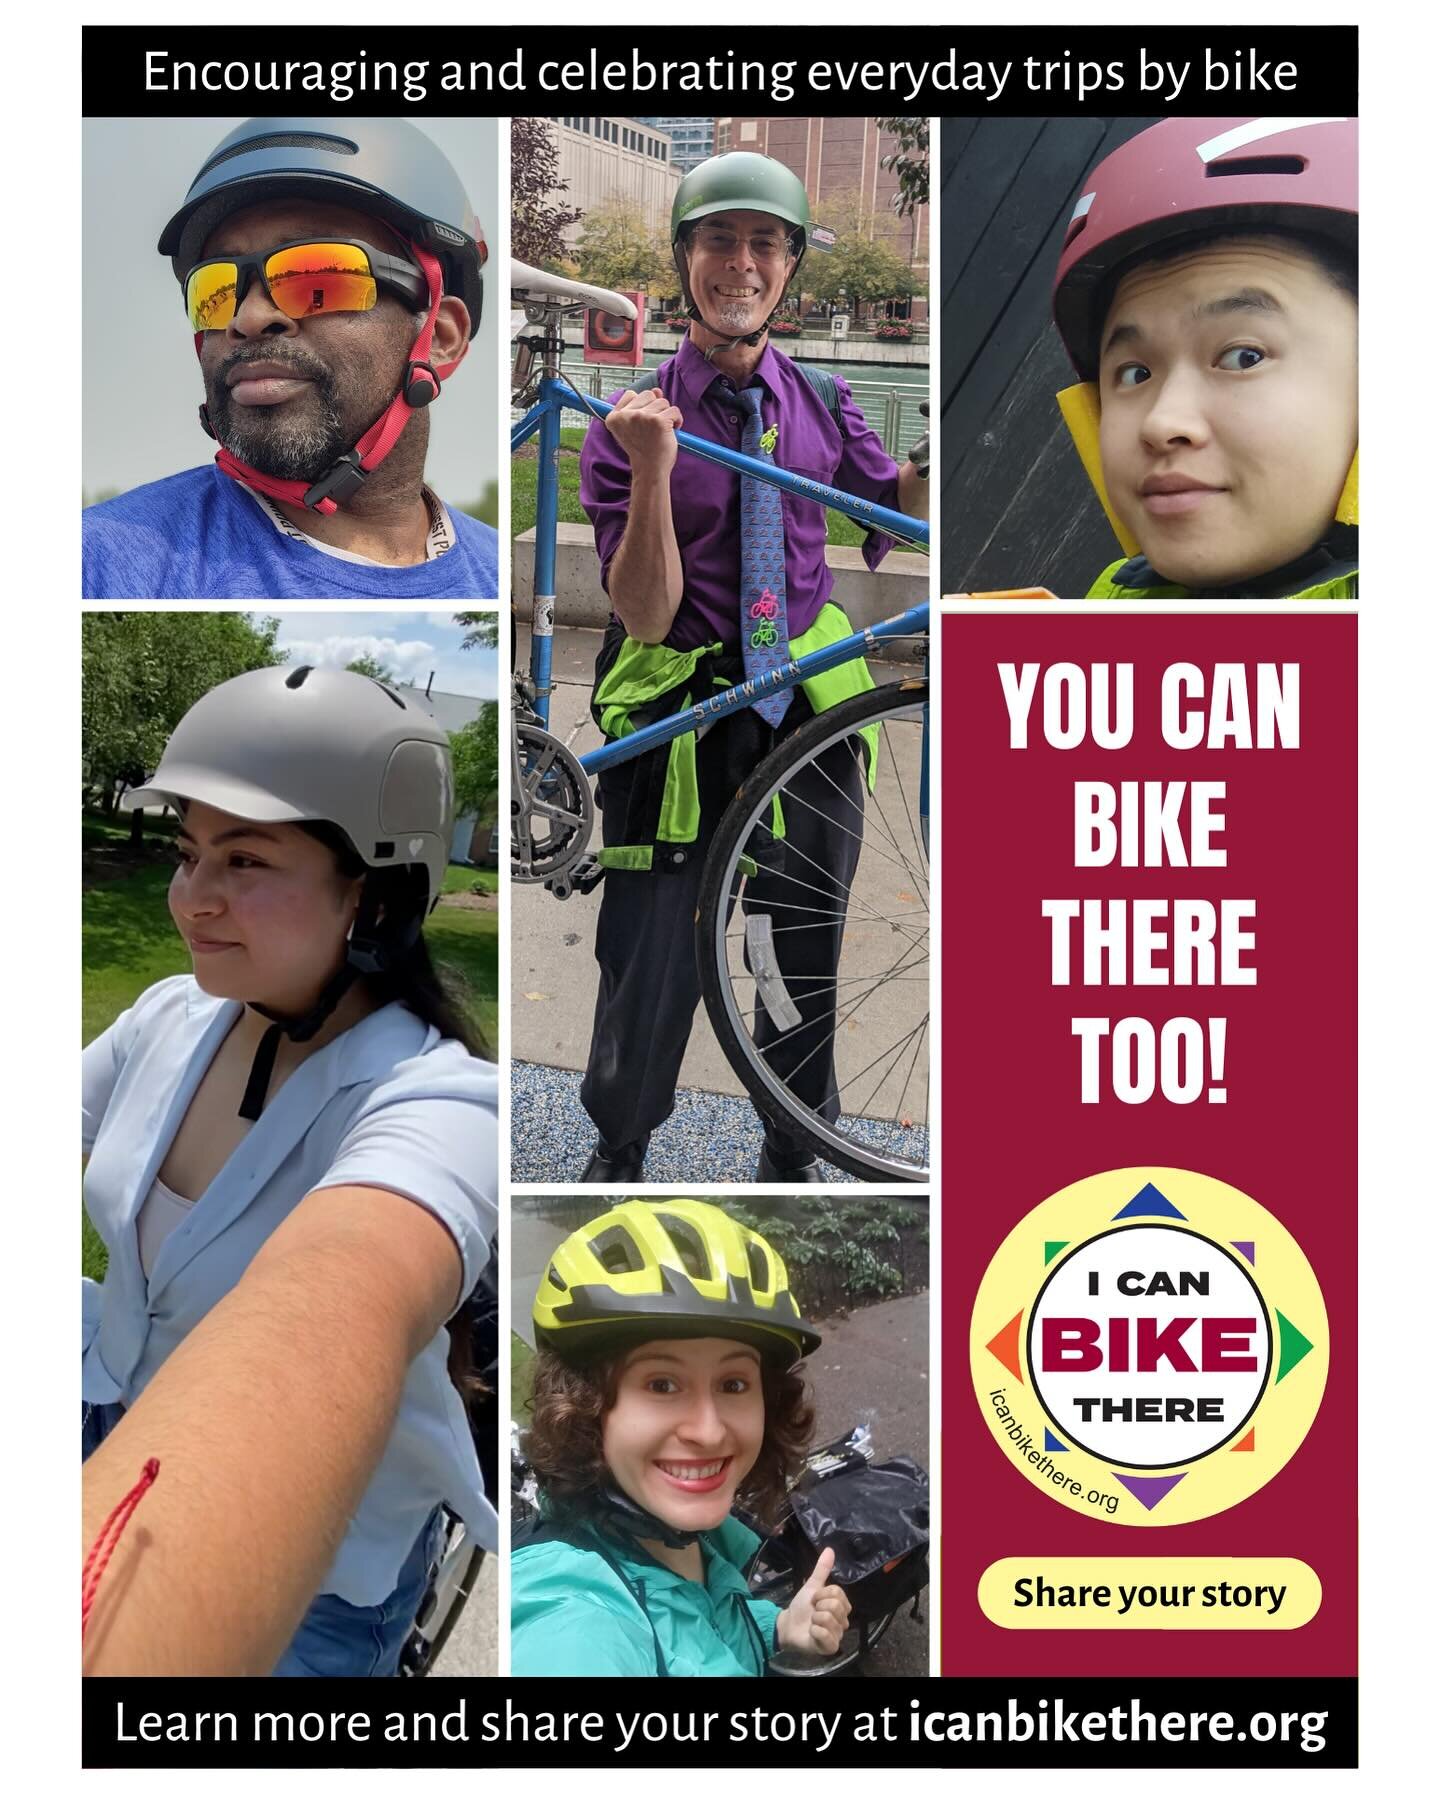 We&rsquo;re pumped to report that more than 120 people have shared their #icanbikethere story since the campaign launched last summer 🤗😳😱

It&rsquo;s time we heard from you. Yeah you&hellip;the person viewing this post on social media right now 👆